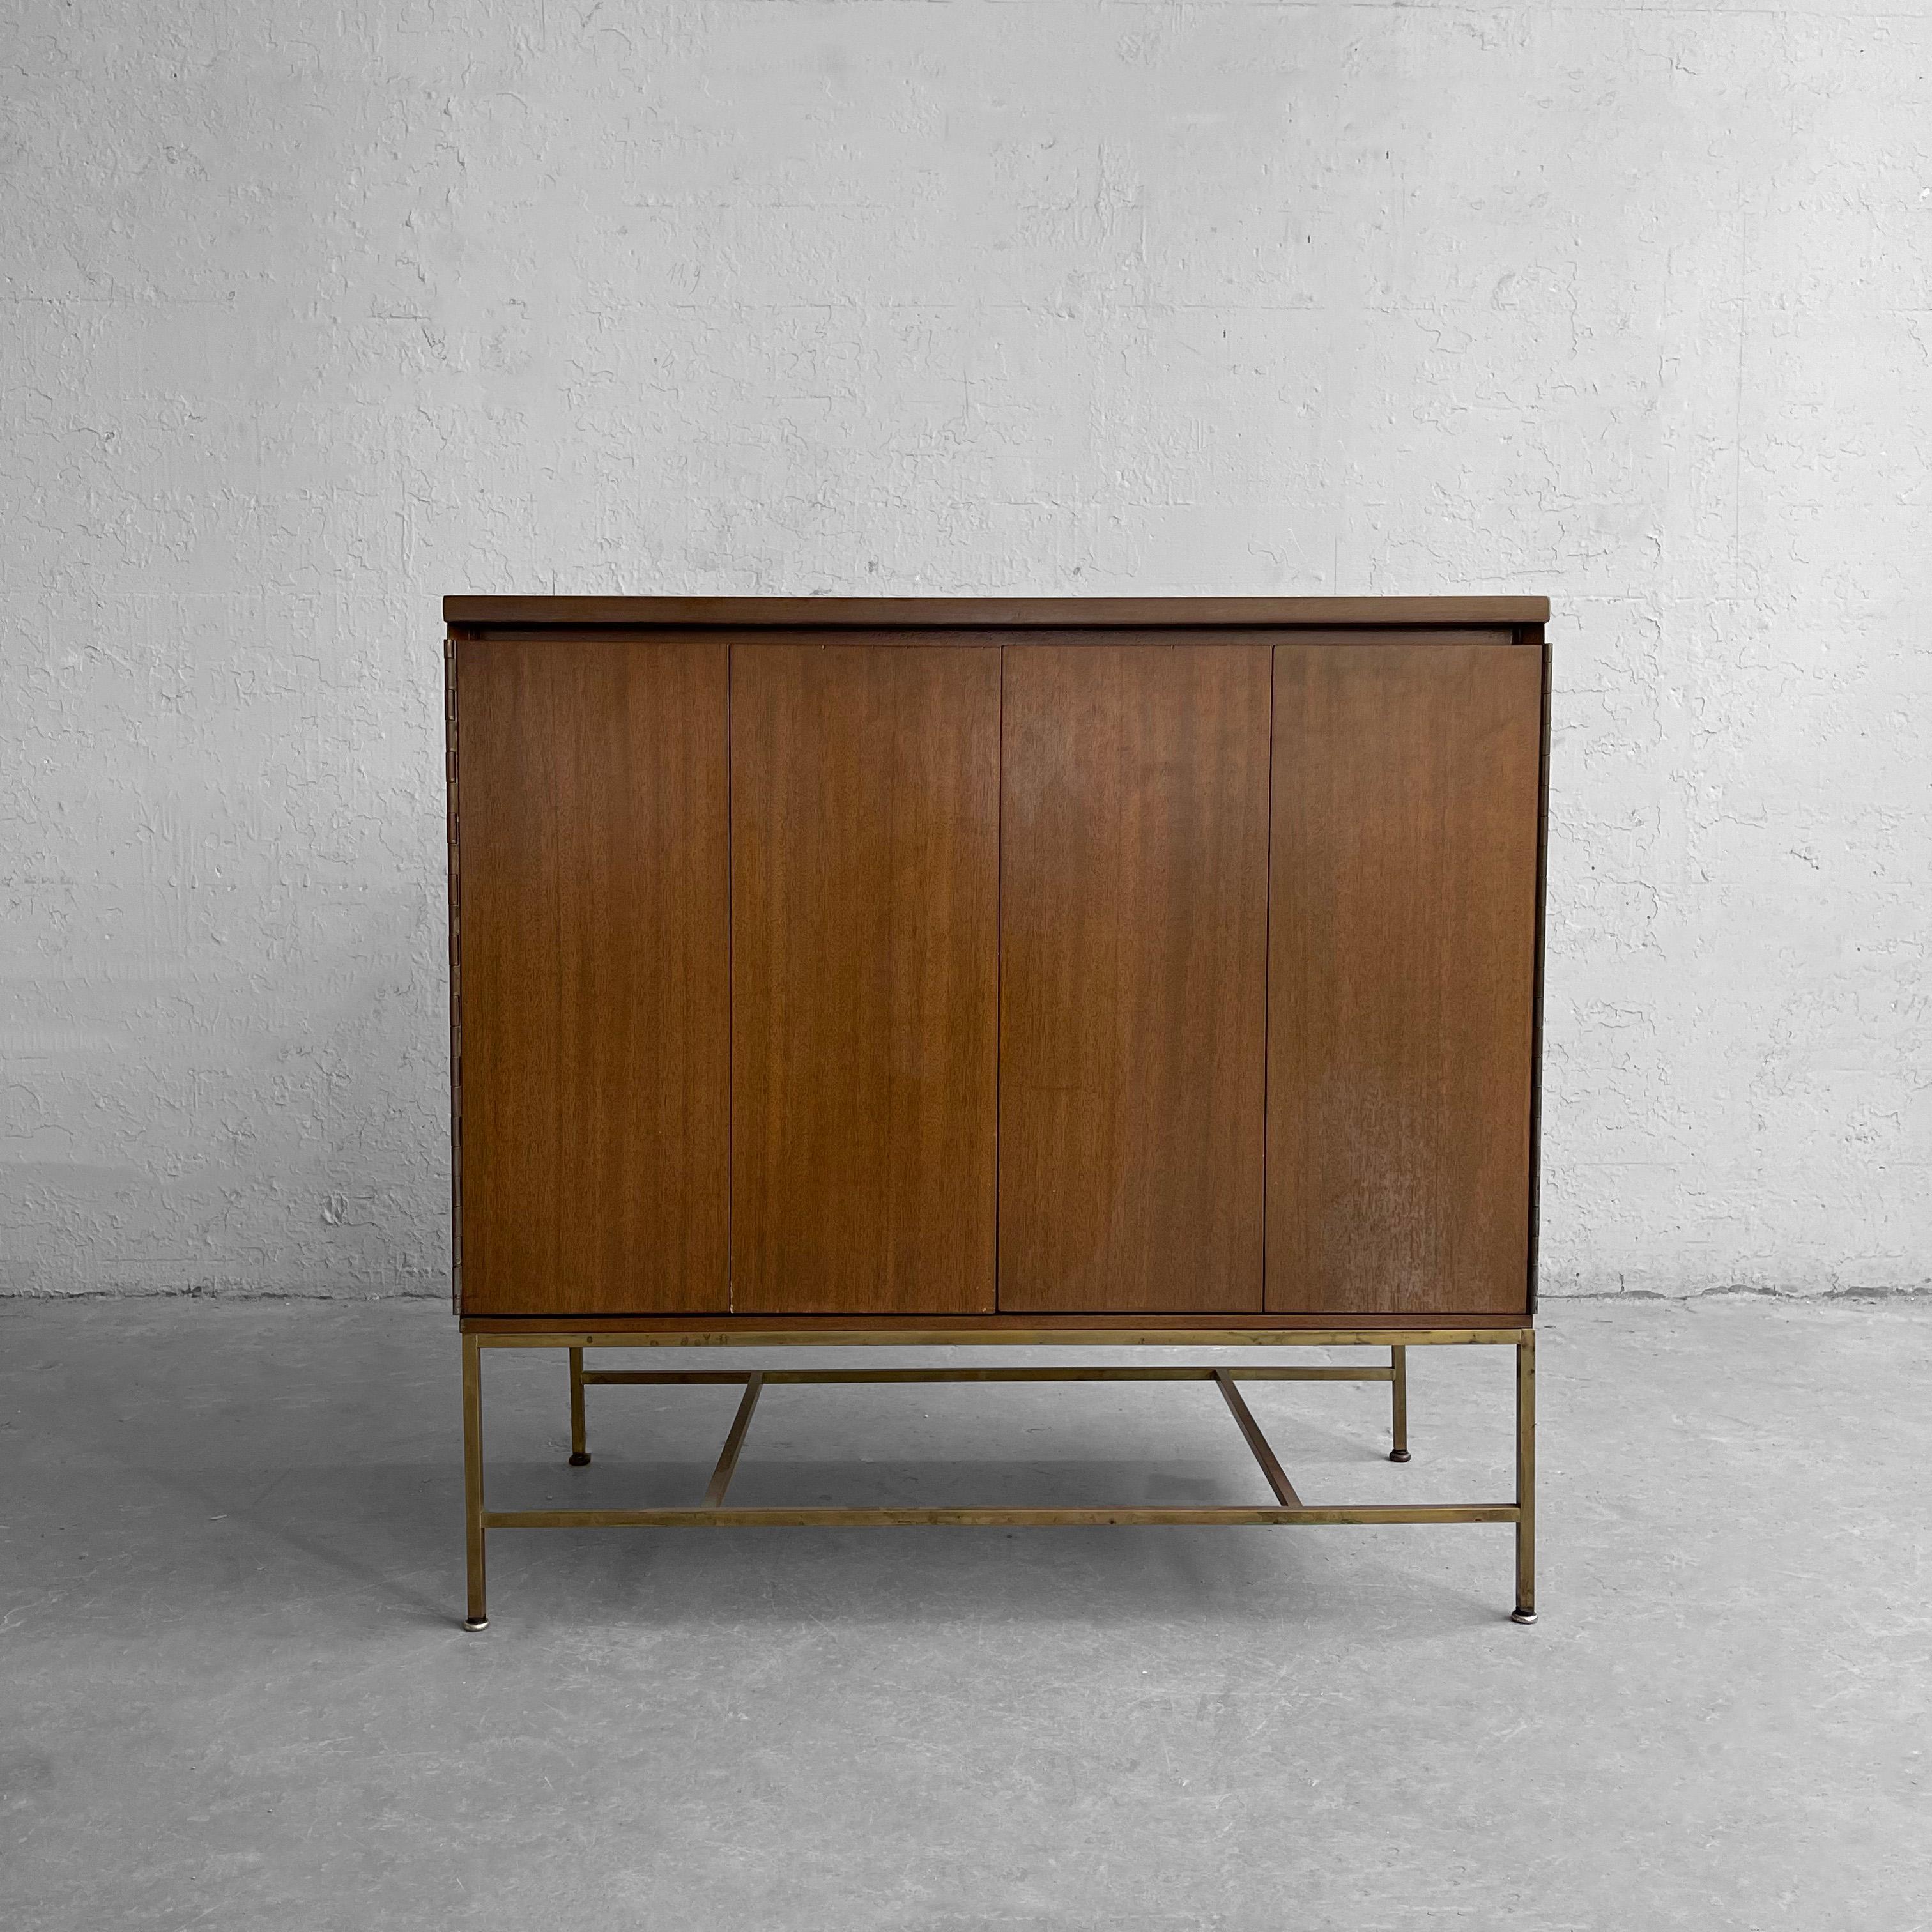 Mid-Century Modern, streamlined, mahogany dresser by Paul McCobb for Calvin Furniture: The Irwin Collection features bi-fold doors that open to reveal four 5 inch height drawers that float on a minimal brass base.